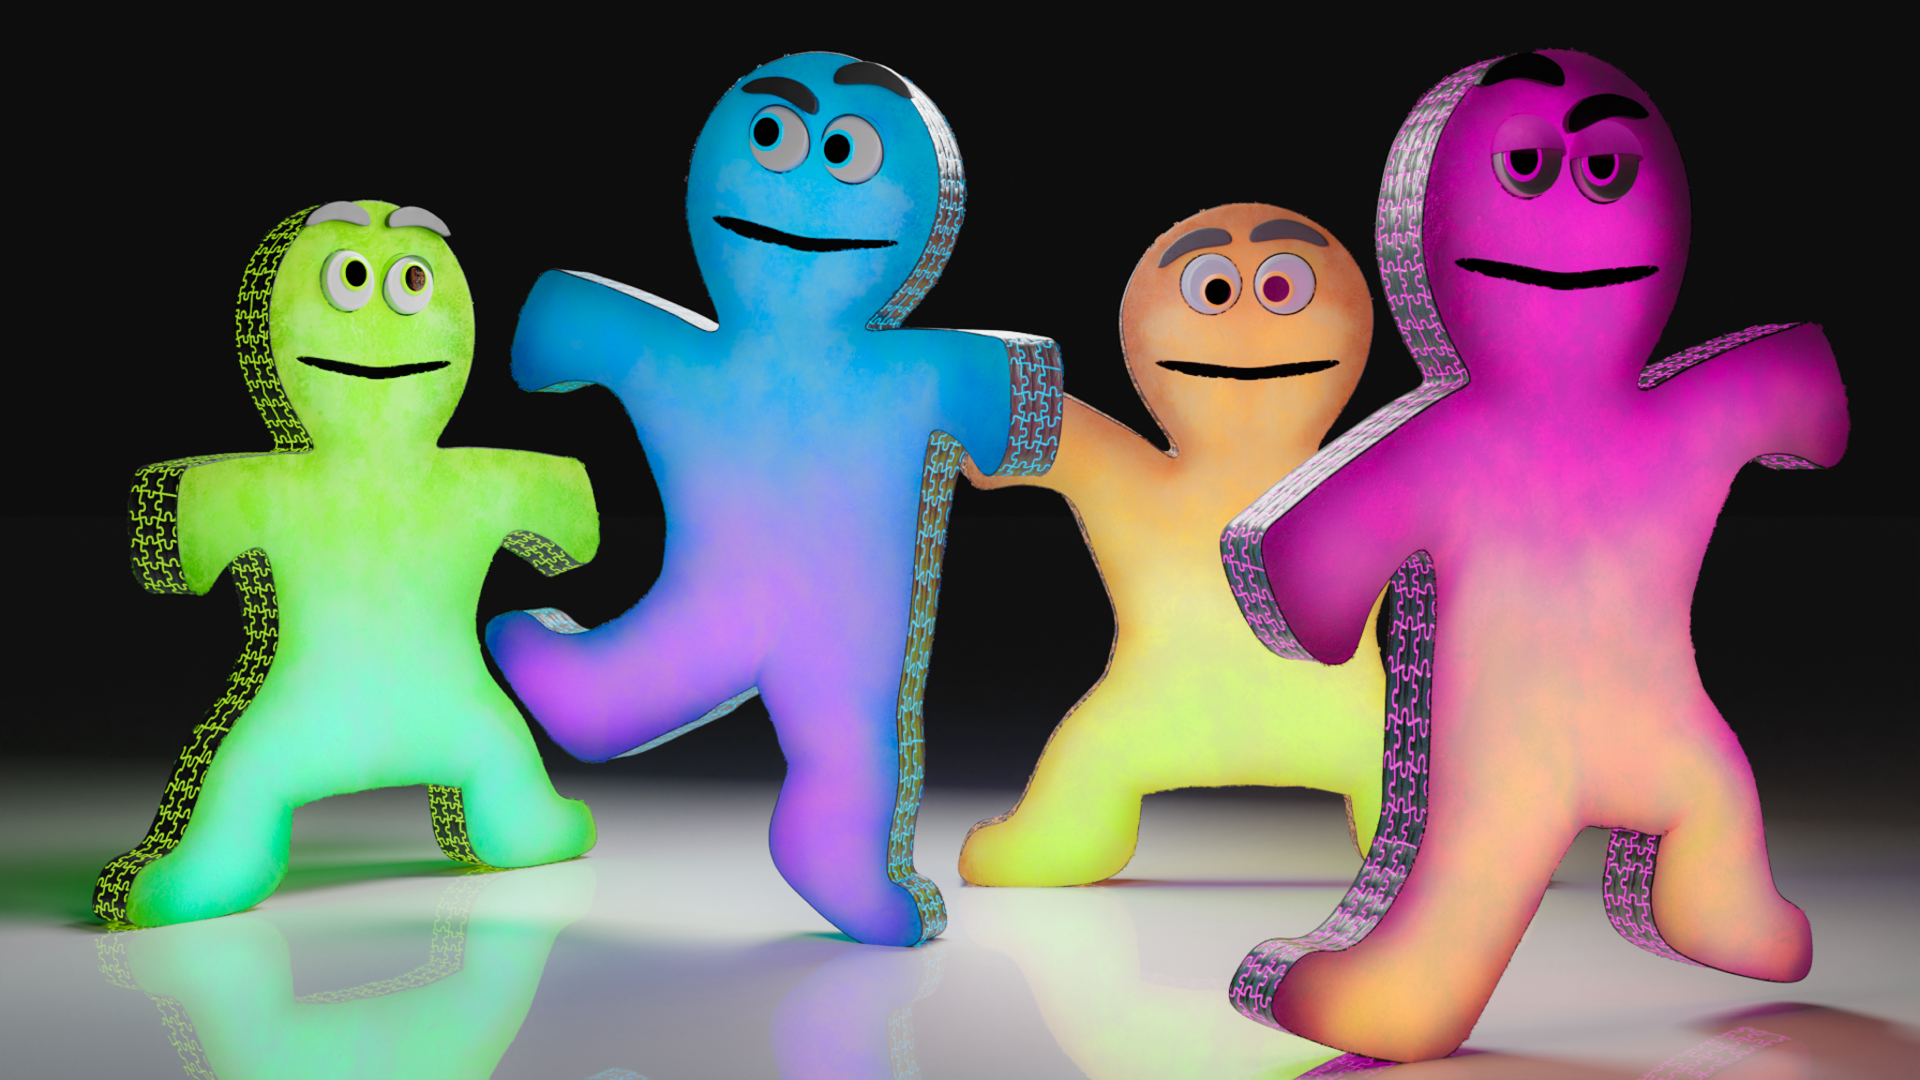 /content/5 different-colored 3D Puzzy characters posing.